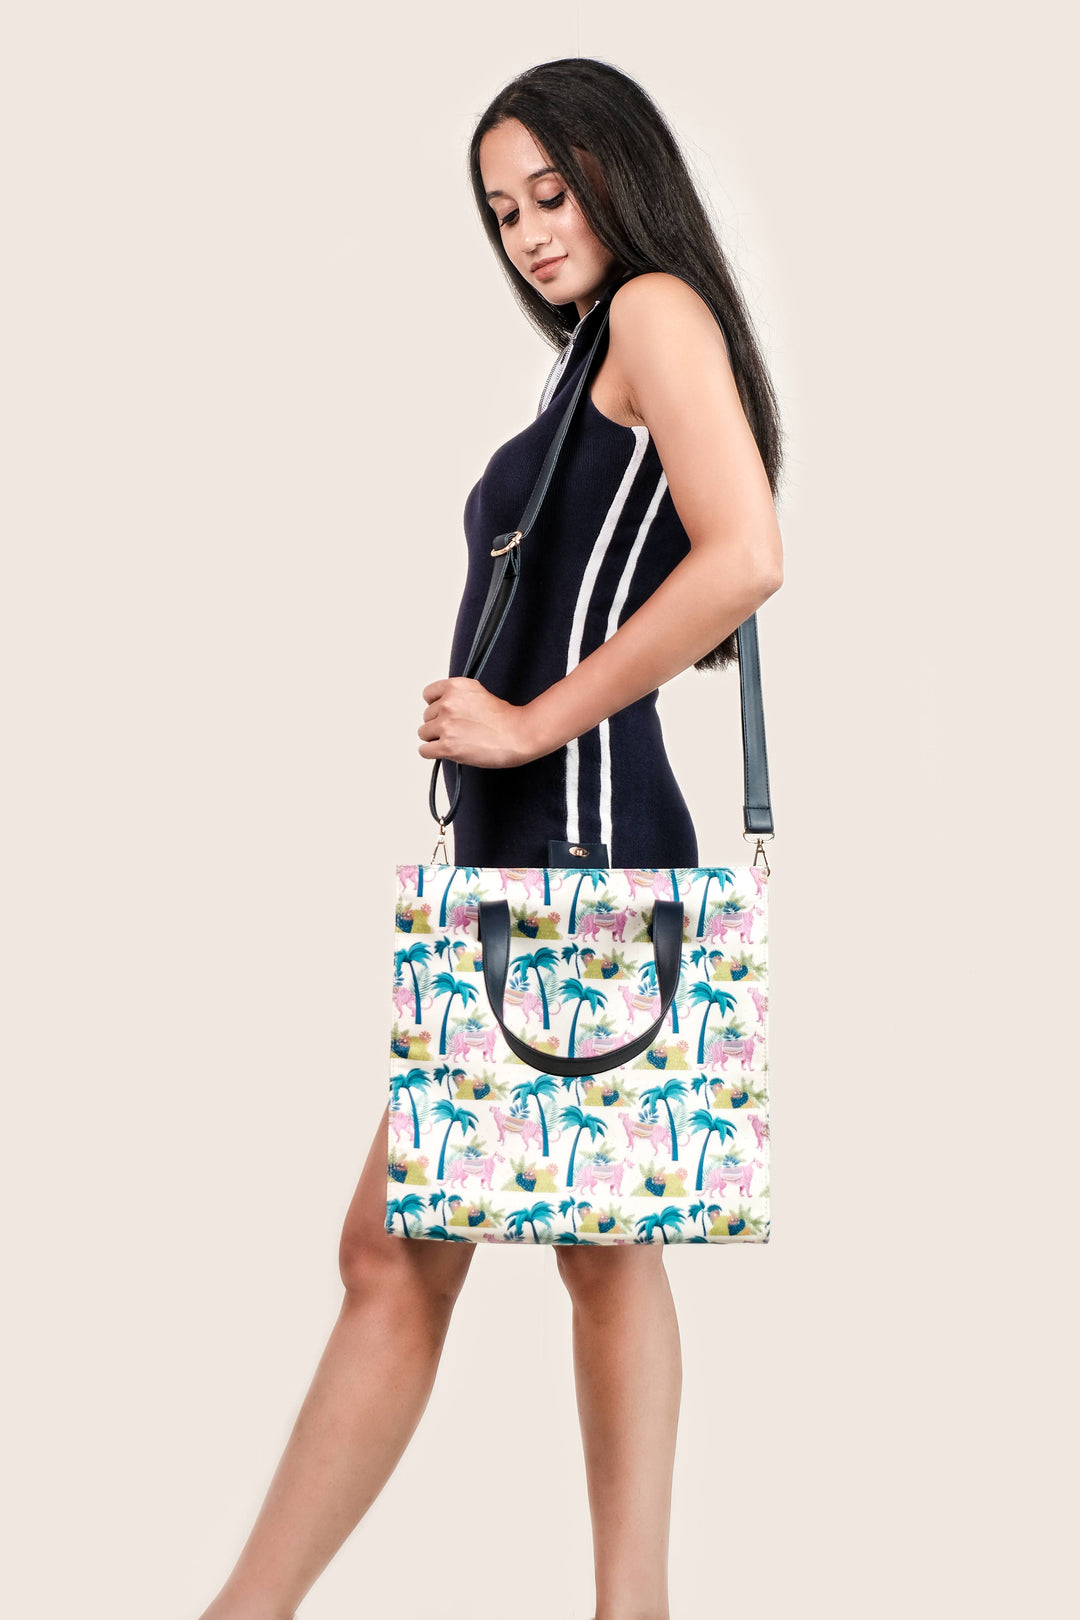 Jungle Party | Tote Bag